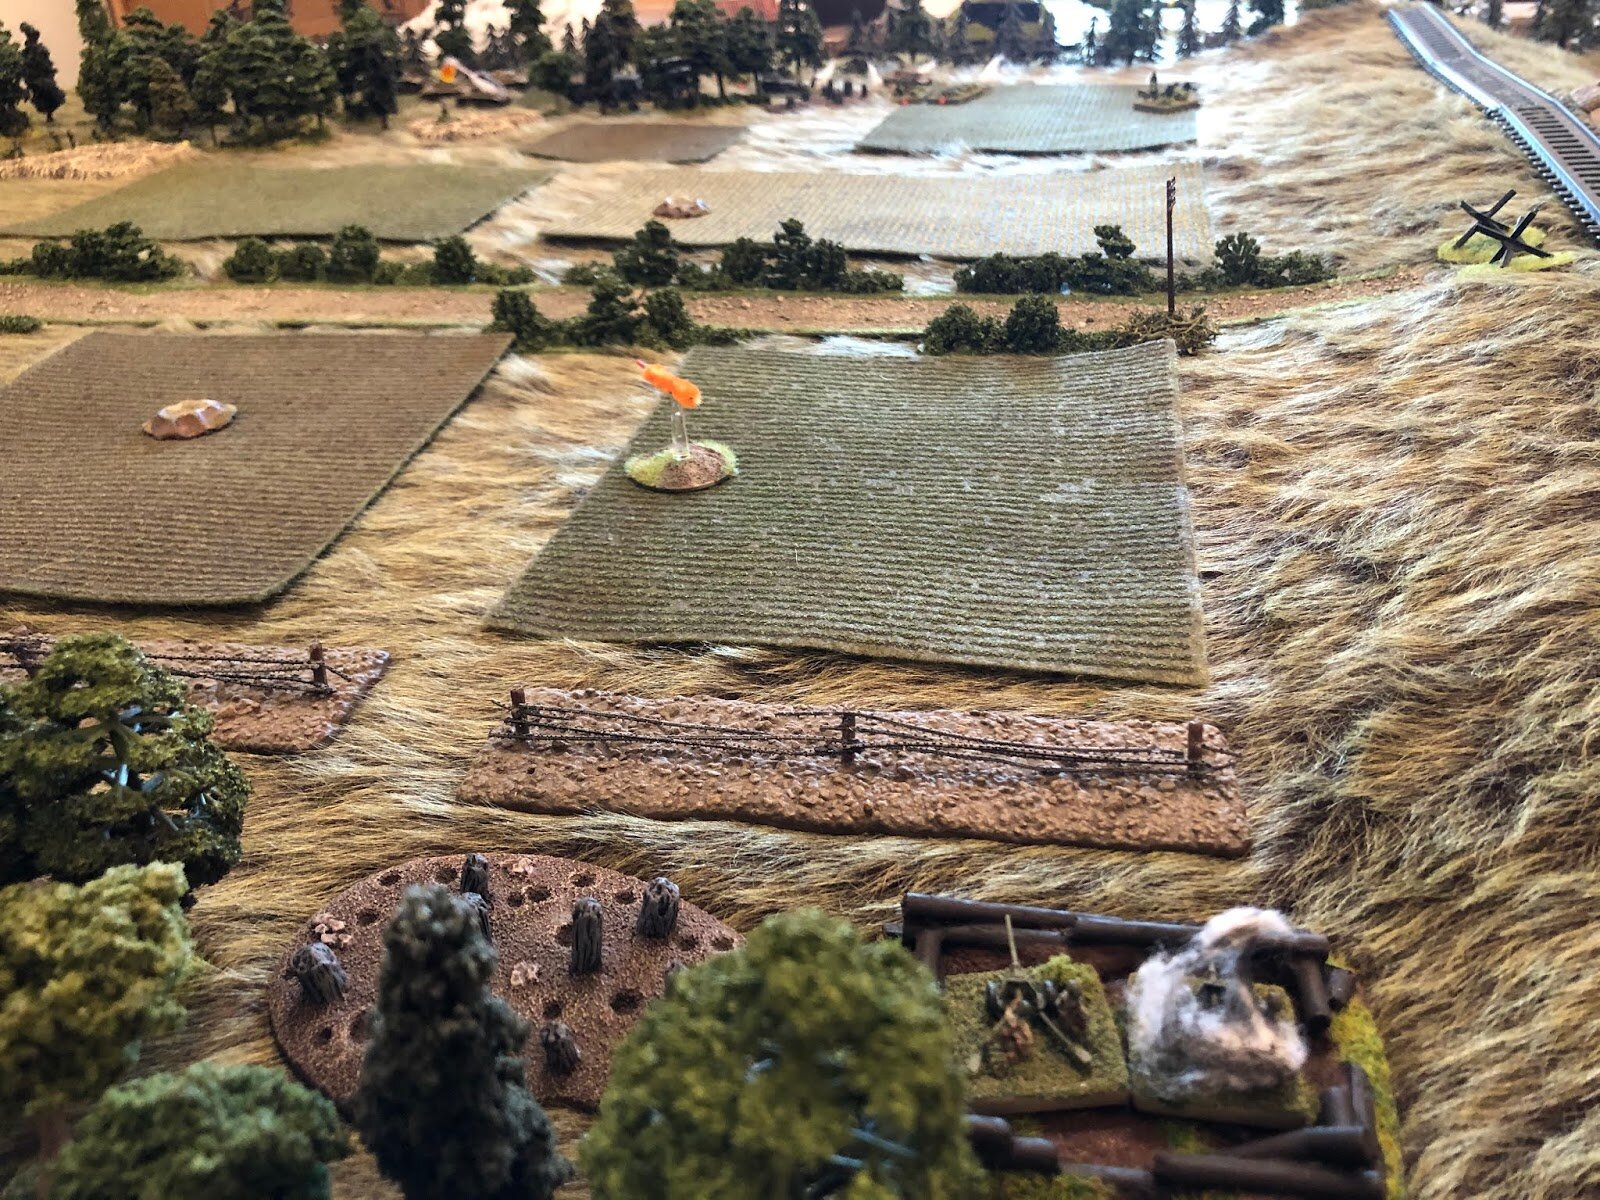  And things are getting critical when the Soviets' last remaining anti-tank gun (bottom right) cuts loose again towards the northwest woods (top center left)...  